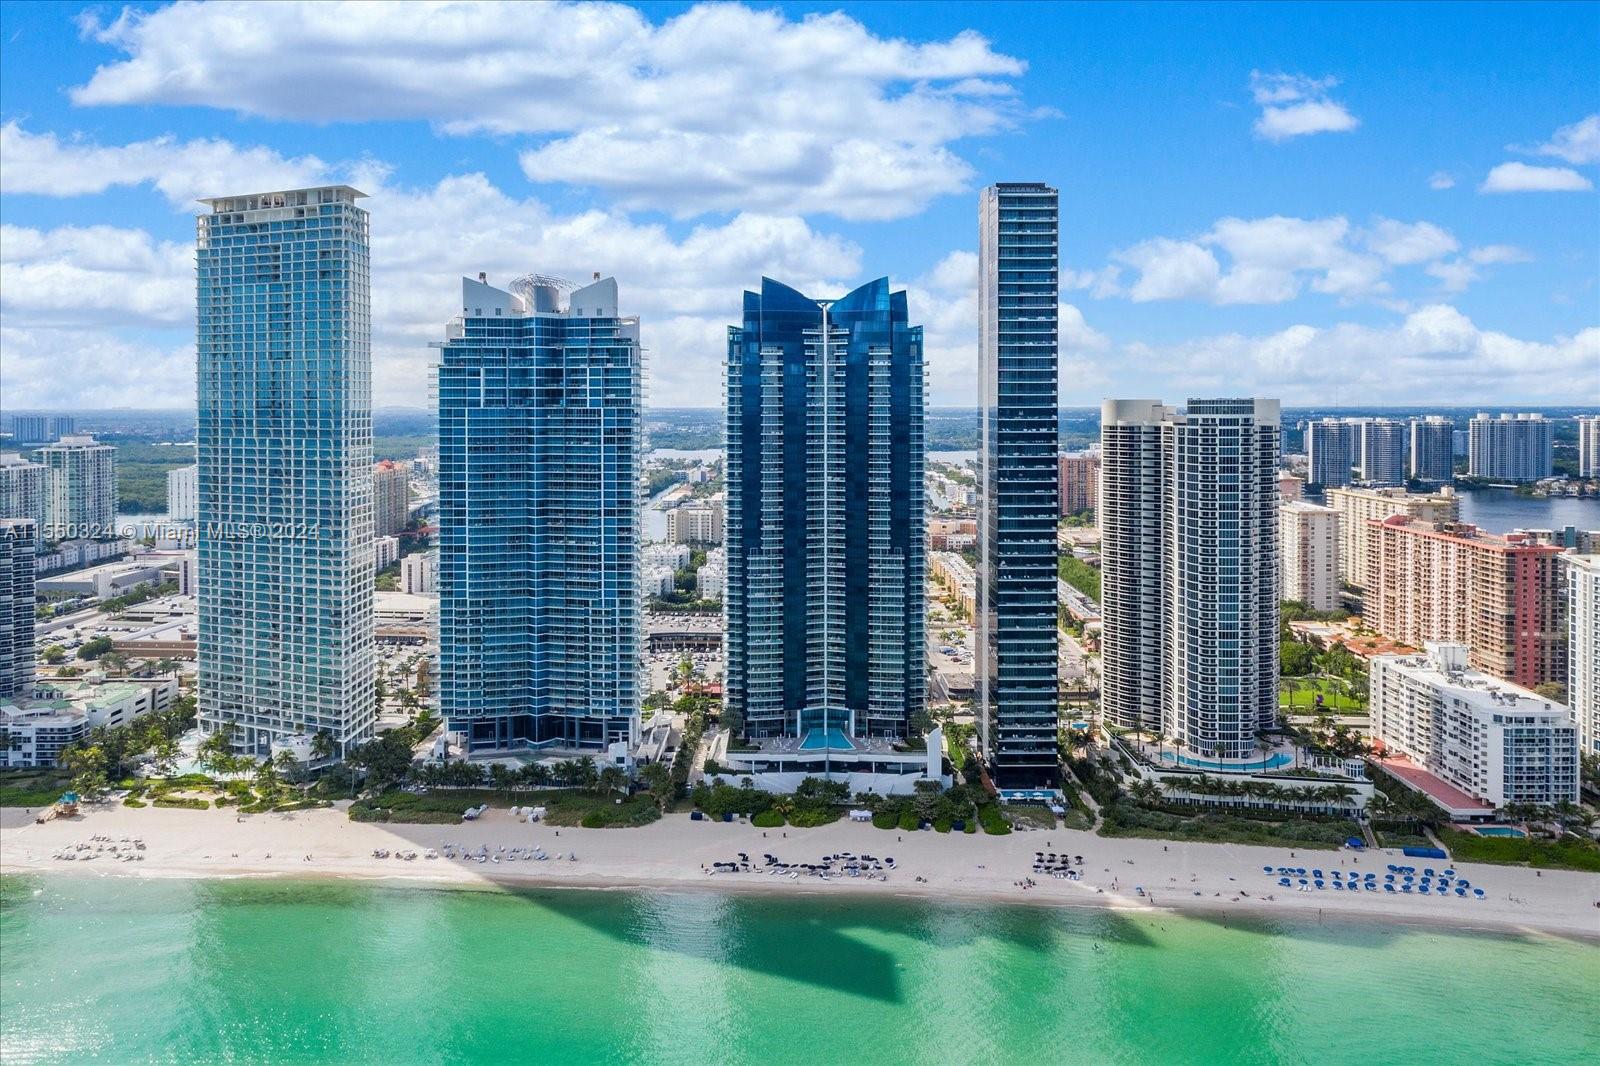 Enjoy direct, unobstructed, breathtaking ocean views from every room of this fantastic 1bed/1.5bath residence in the sky with beautiful finishes such as marble floors throughout, motorized window treatments and a phenomenal balcony with lots of privacy. This beautiful unit is located in Jade Ocean, one of the most desirable buildings in Sunny Isles Beach, our “American Riviera”, offering its residents an ample list of spectacular amenities, such as two heated pools, party room, state-of-the-art gymnasium, business center, children’s playroom, theater room, game room, a spectacular full service spa, beach/pool and concierge services, a cafe and 24 hours valet and security.